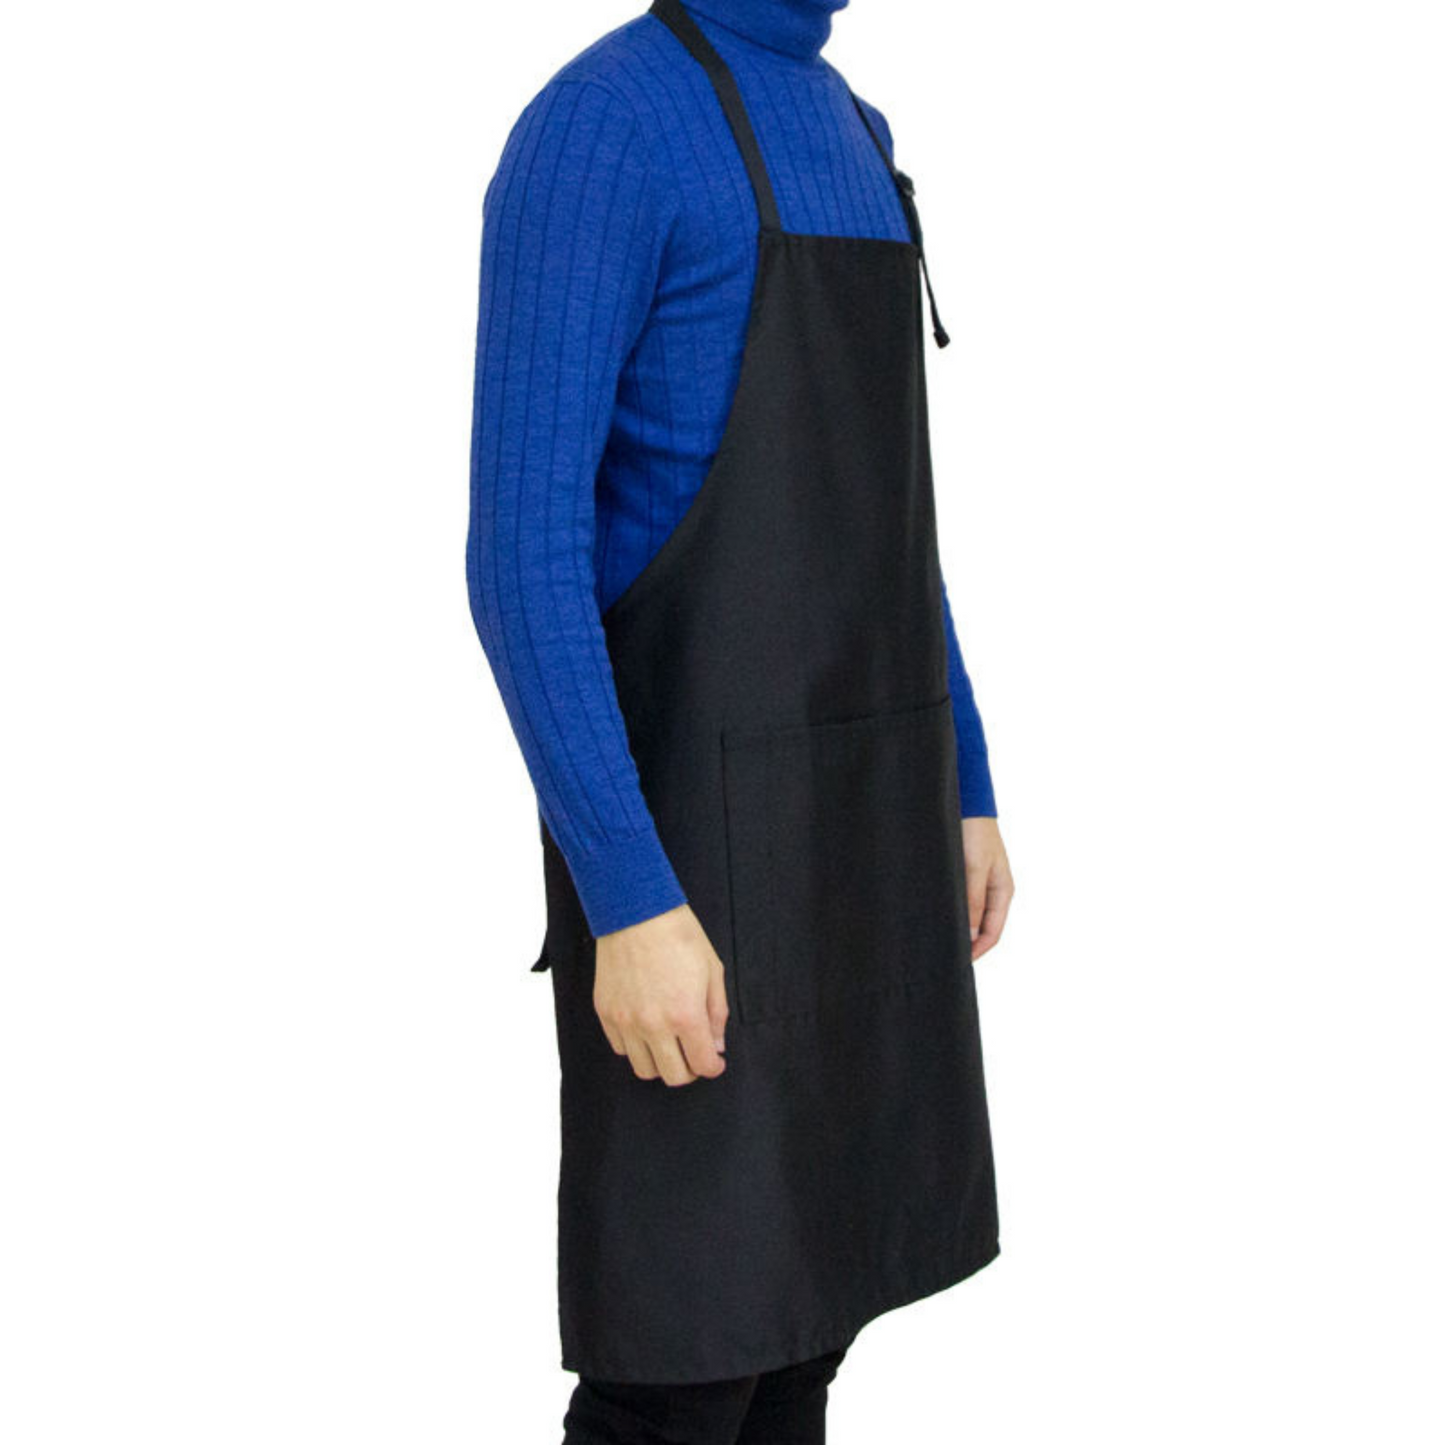 Apron with pockets in front; 07TD/HH;